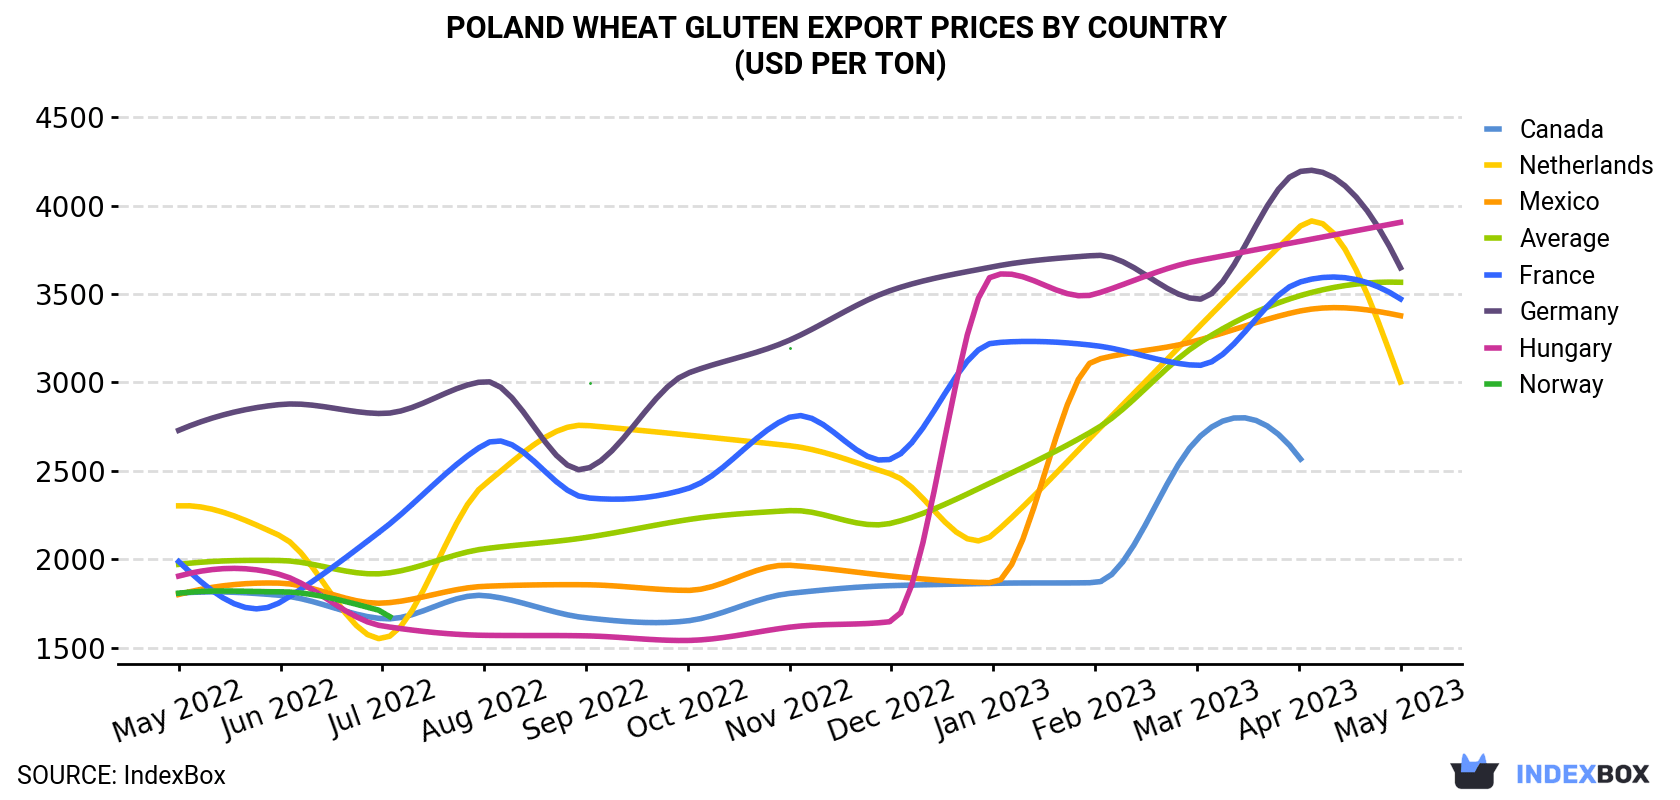 Poland Wheat Gluten Export Prices By Country (USD Per Ton)